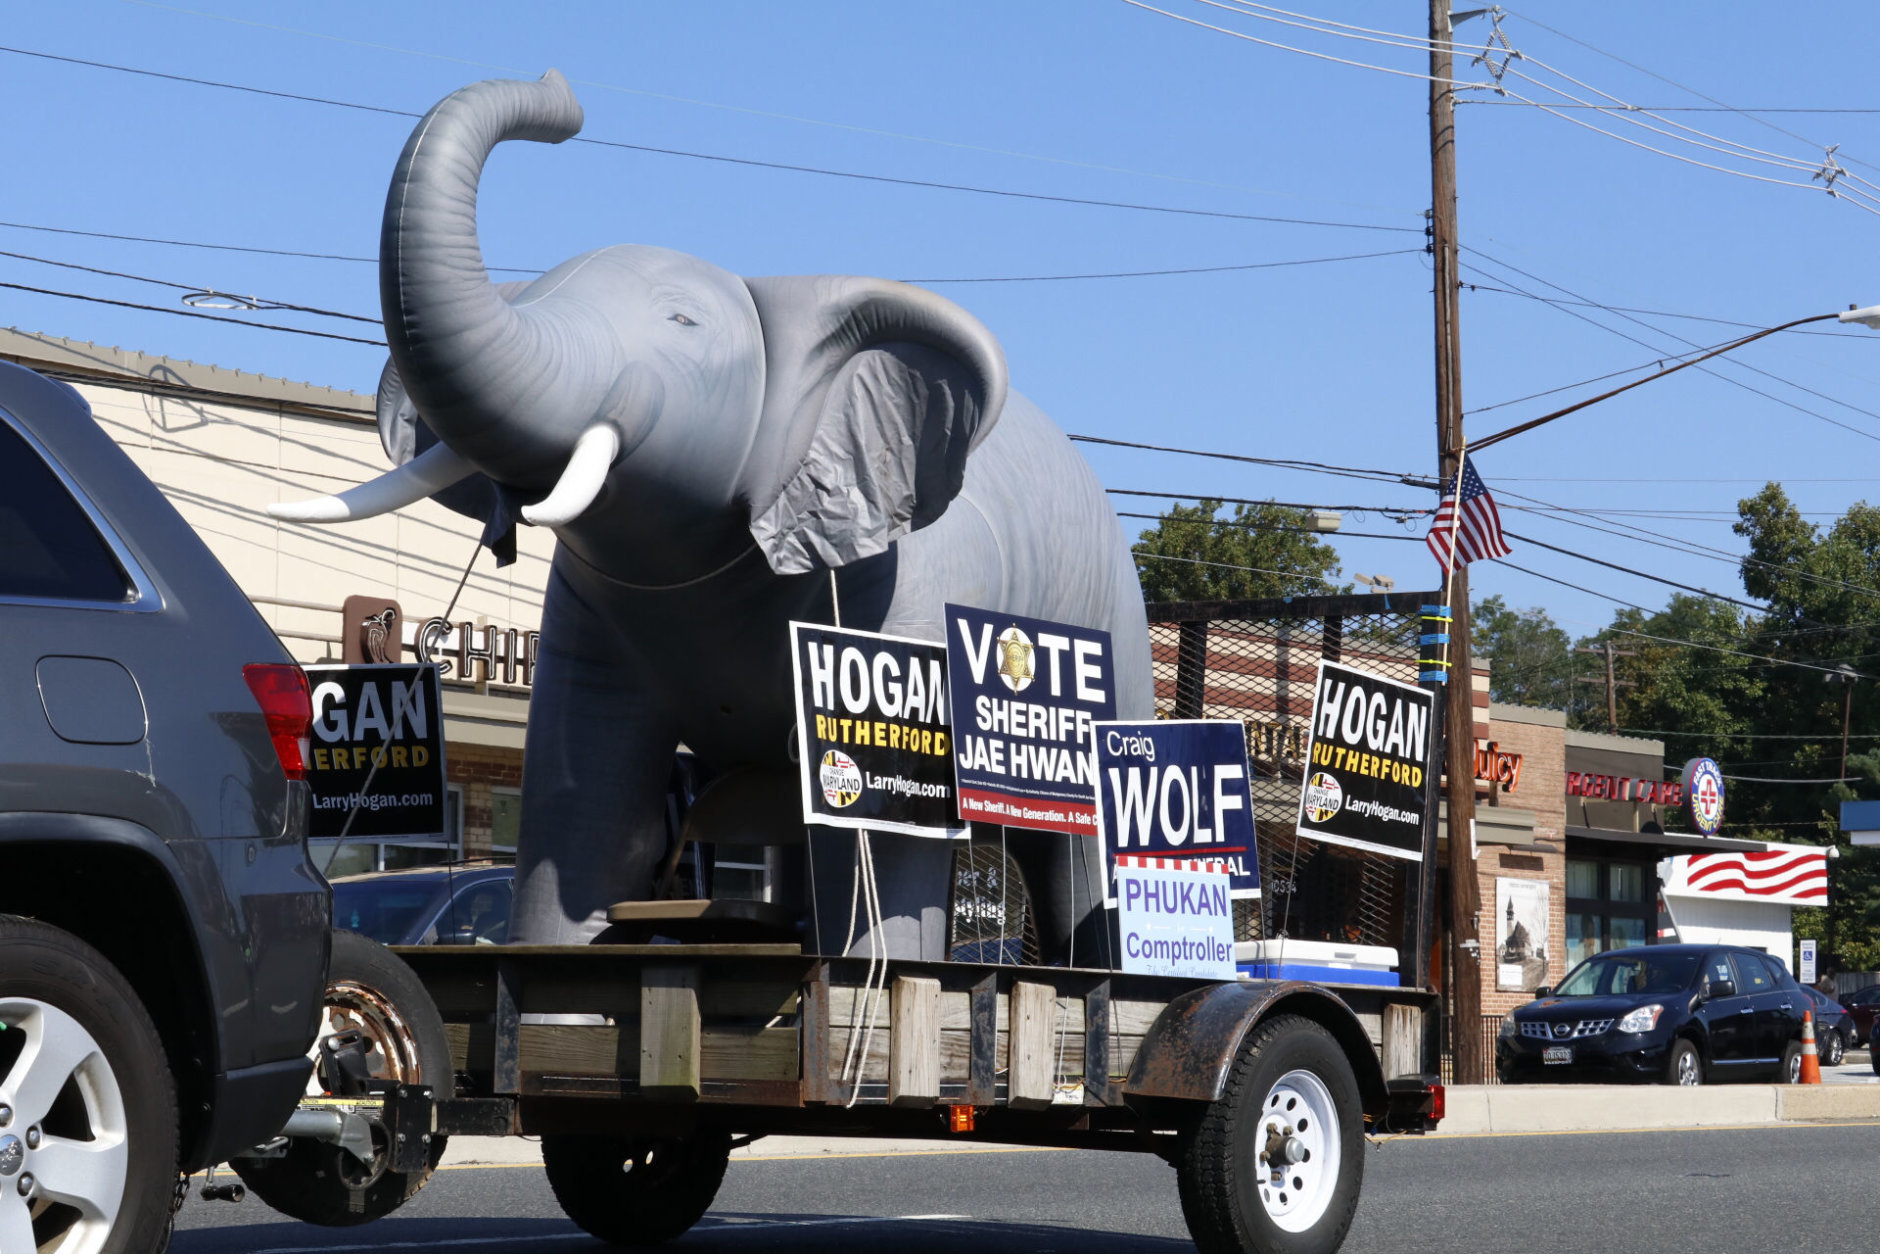 The GOP slate in Maryland brought out the party mascot for the Kensington Labor Day Parade. (WTOP/Kate Ryan)